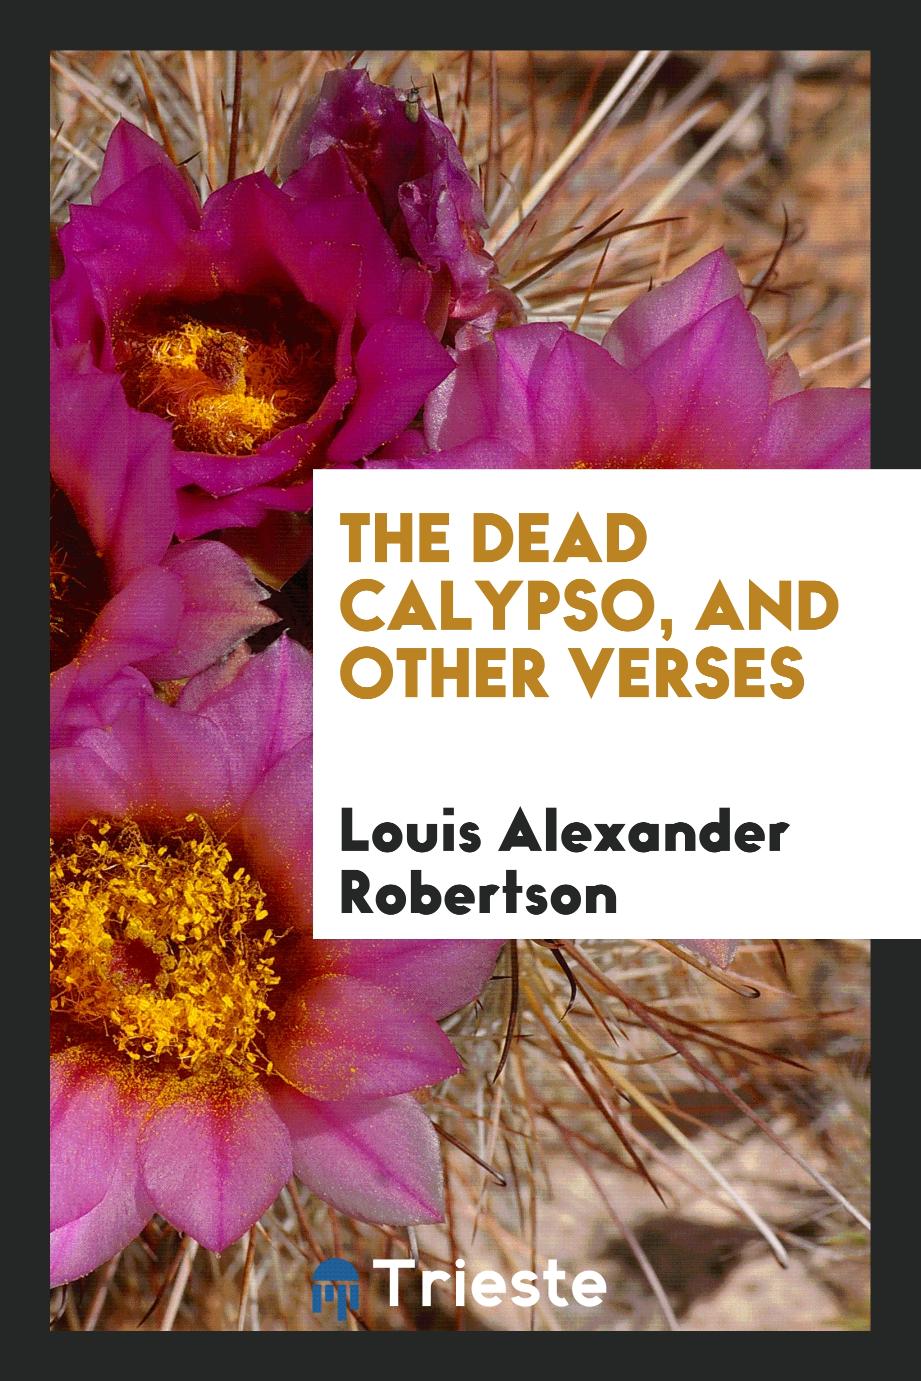 The Dead Calypso, and Other Verses